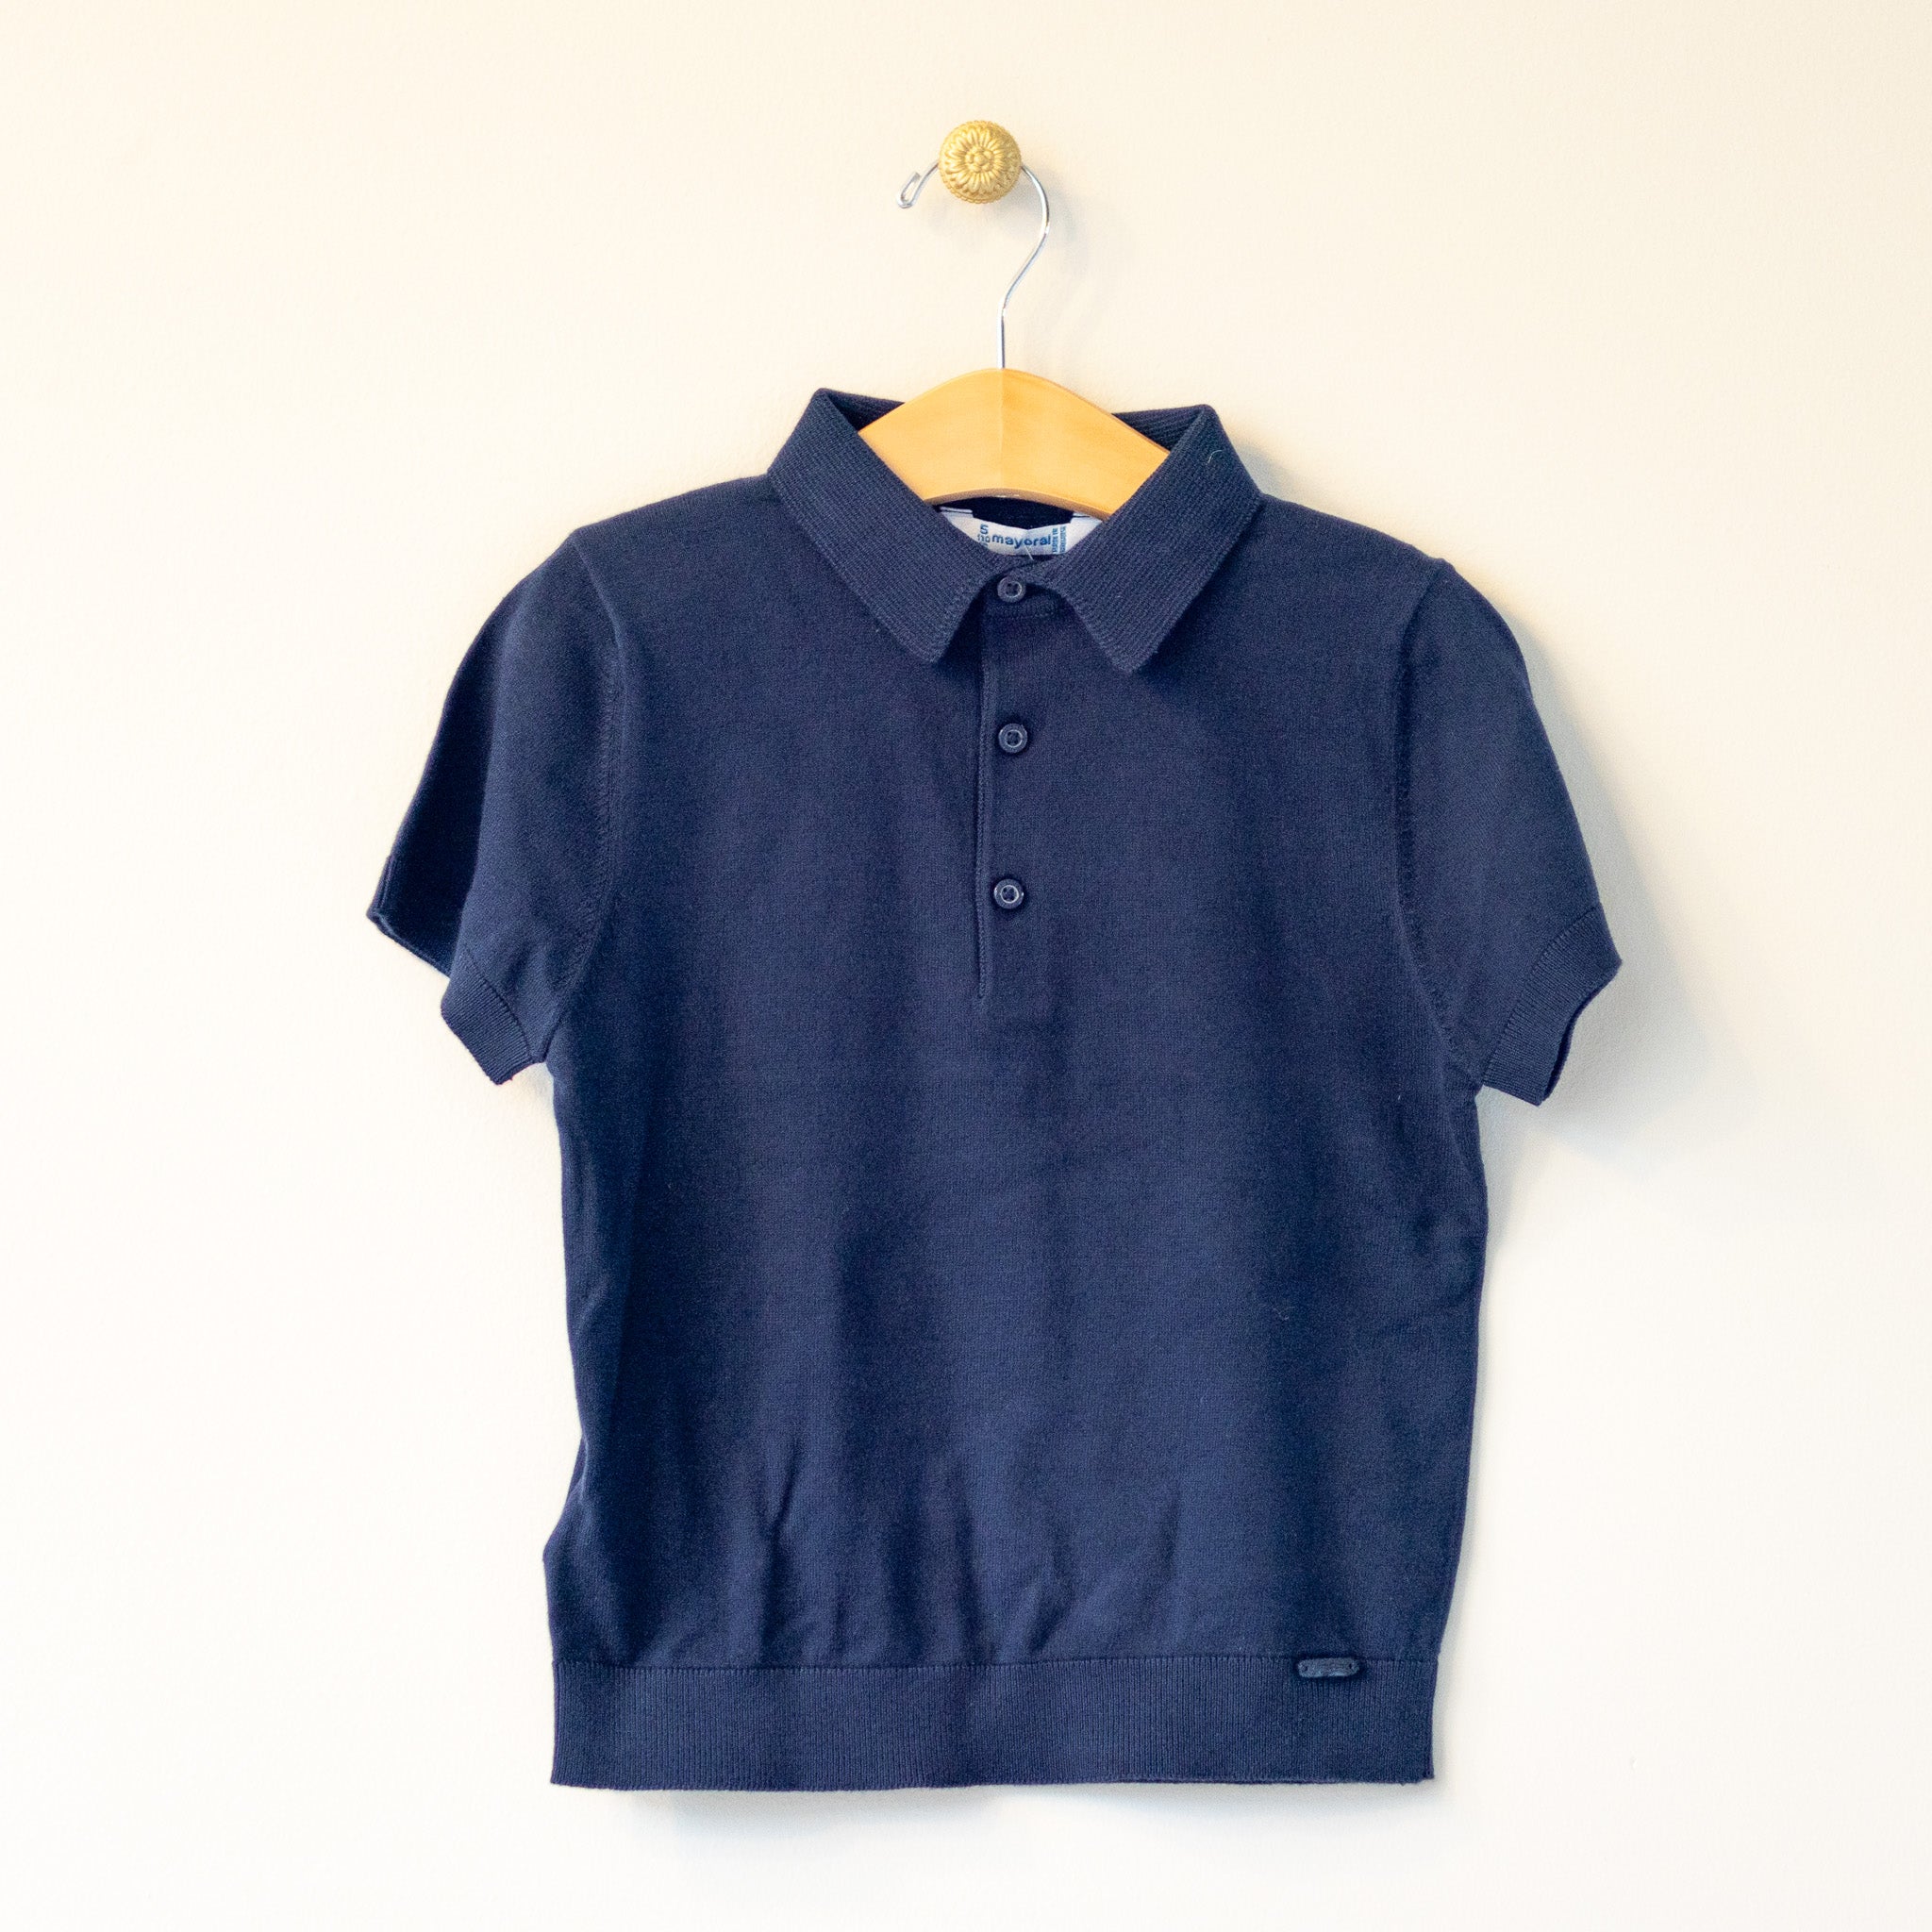 Navy Infant Polo